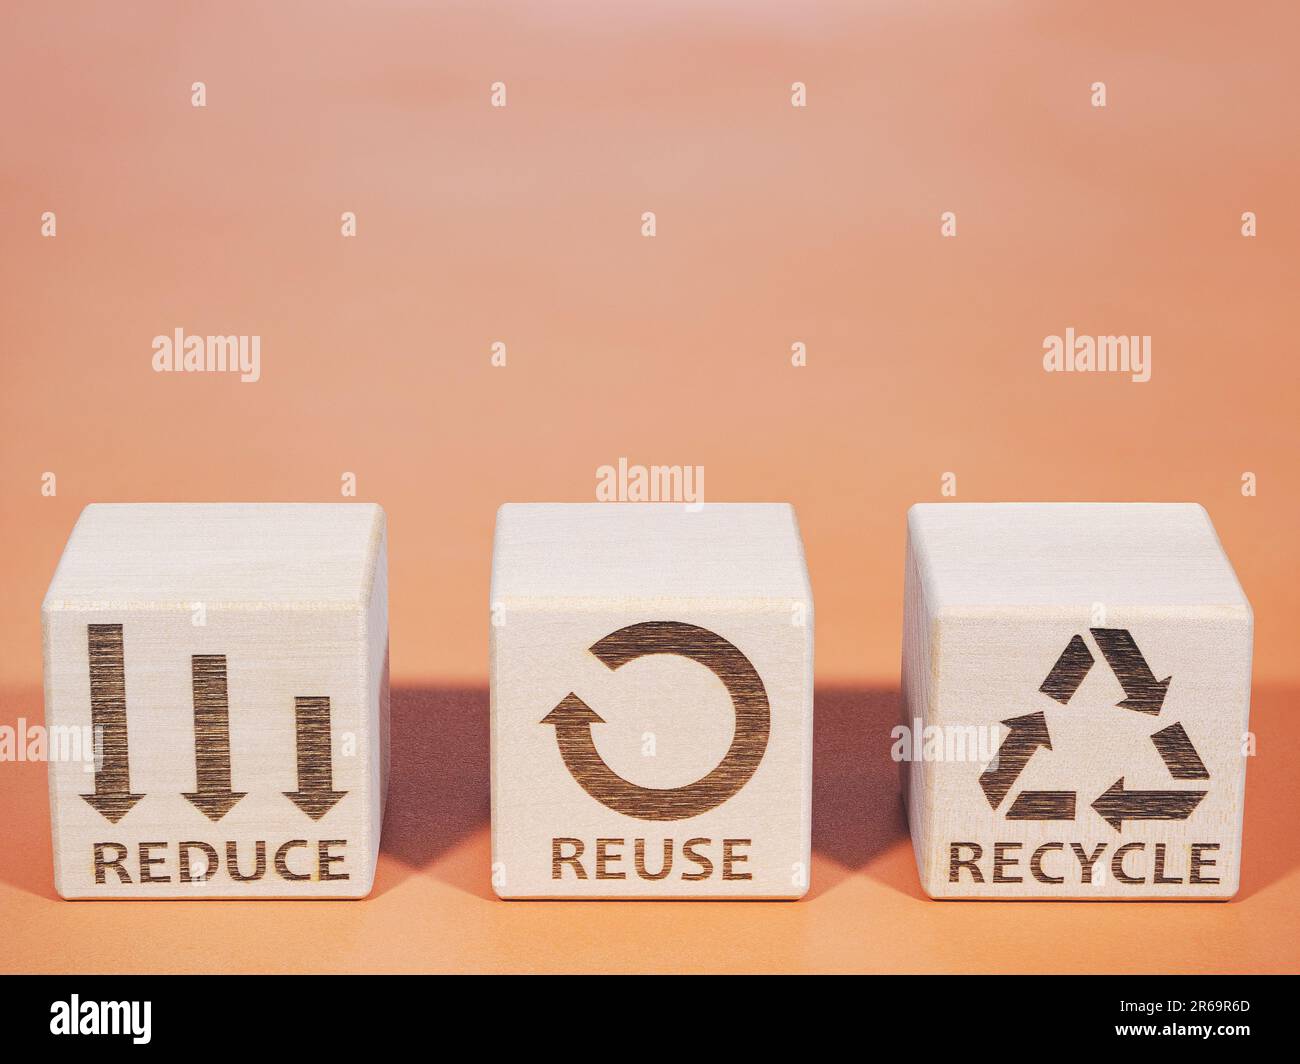 Reduce, Reuse, and Recycle symbols as concept of resources consumption issues Stock Photo